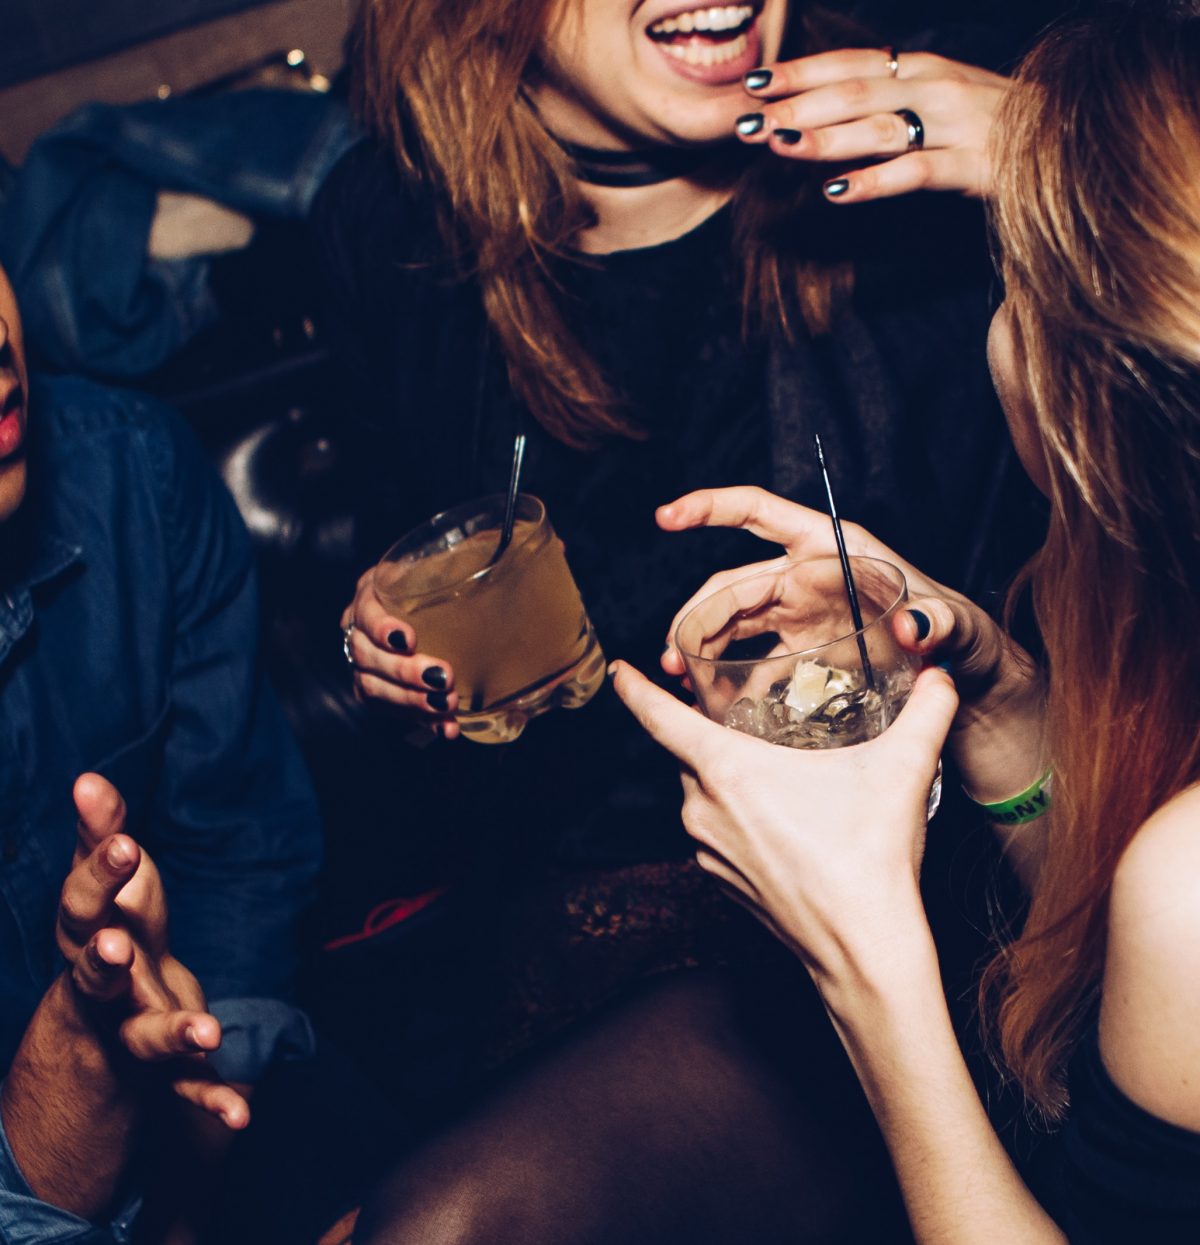 Photo of two women at a party talking while holding glasses with drinks and straws in them, both of them with brown mid-length hair, one woman’s back and arm is partially shown talking to the woman whose torso and lower half of the face also shown while smiling, and a guy next to the second woman barely seen in the shot